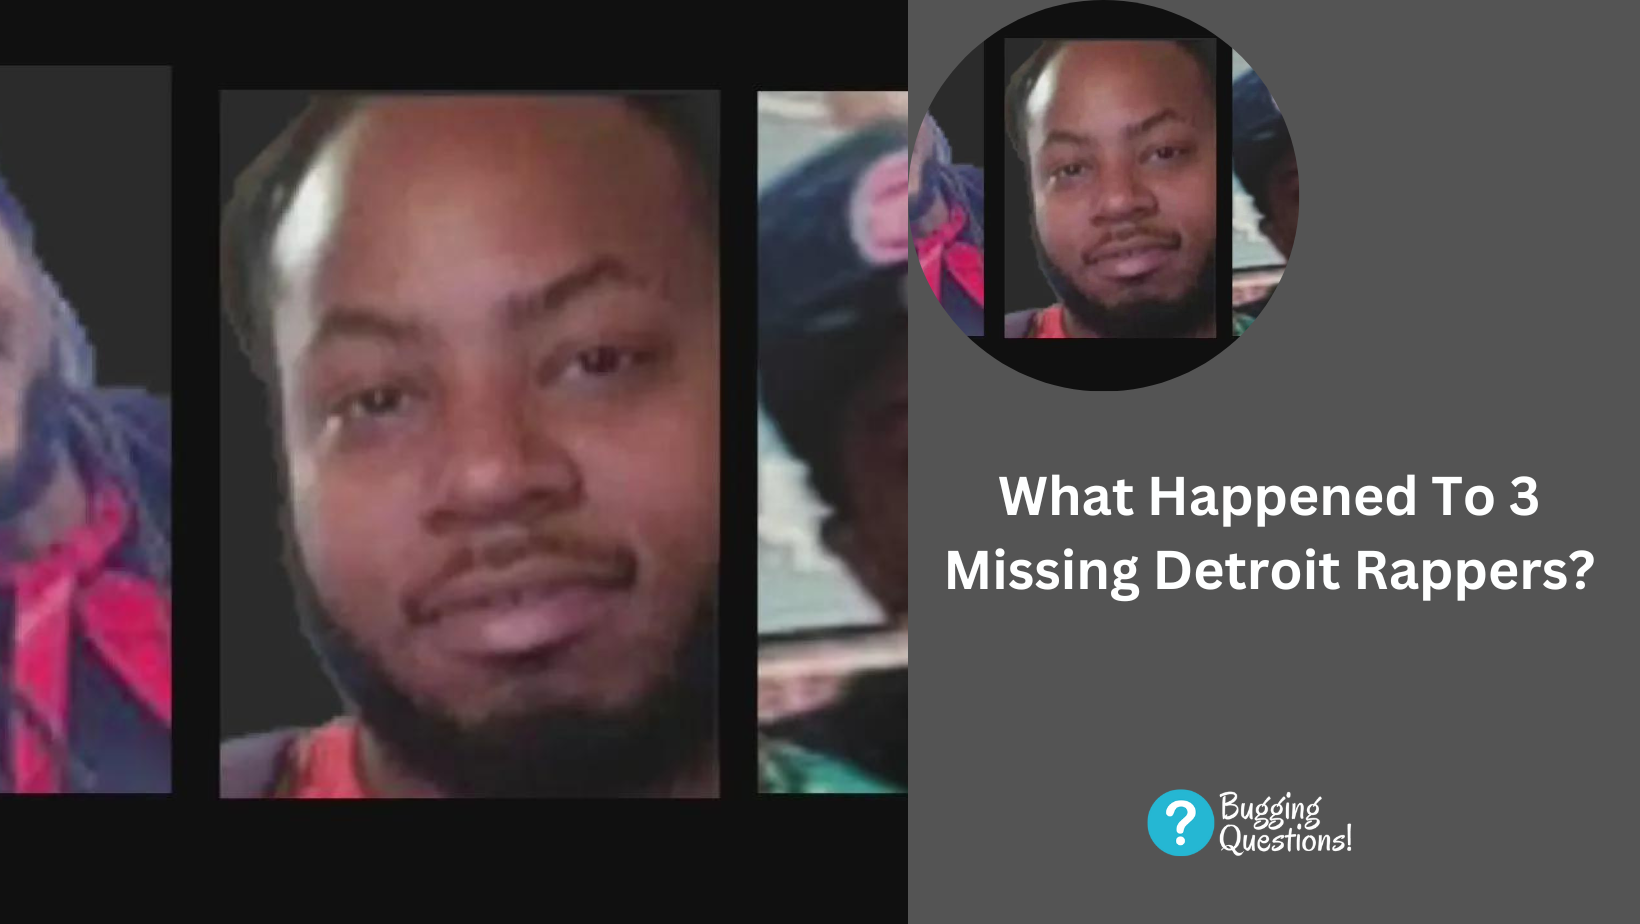 What Happened To 3 Missing Detroit Rappers?